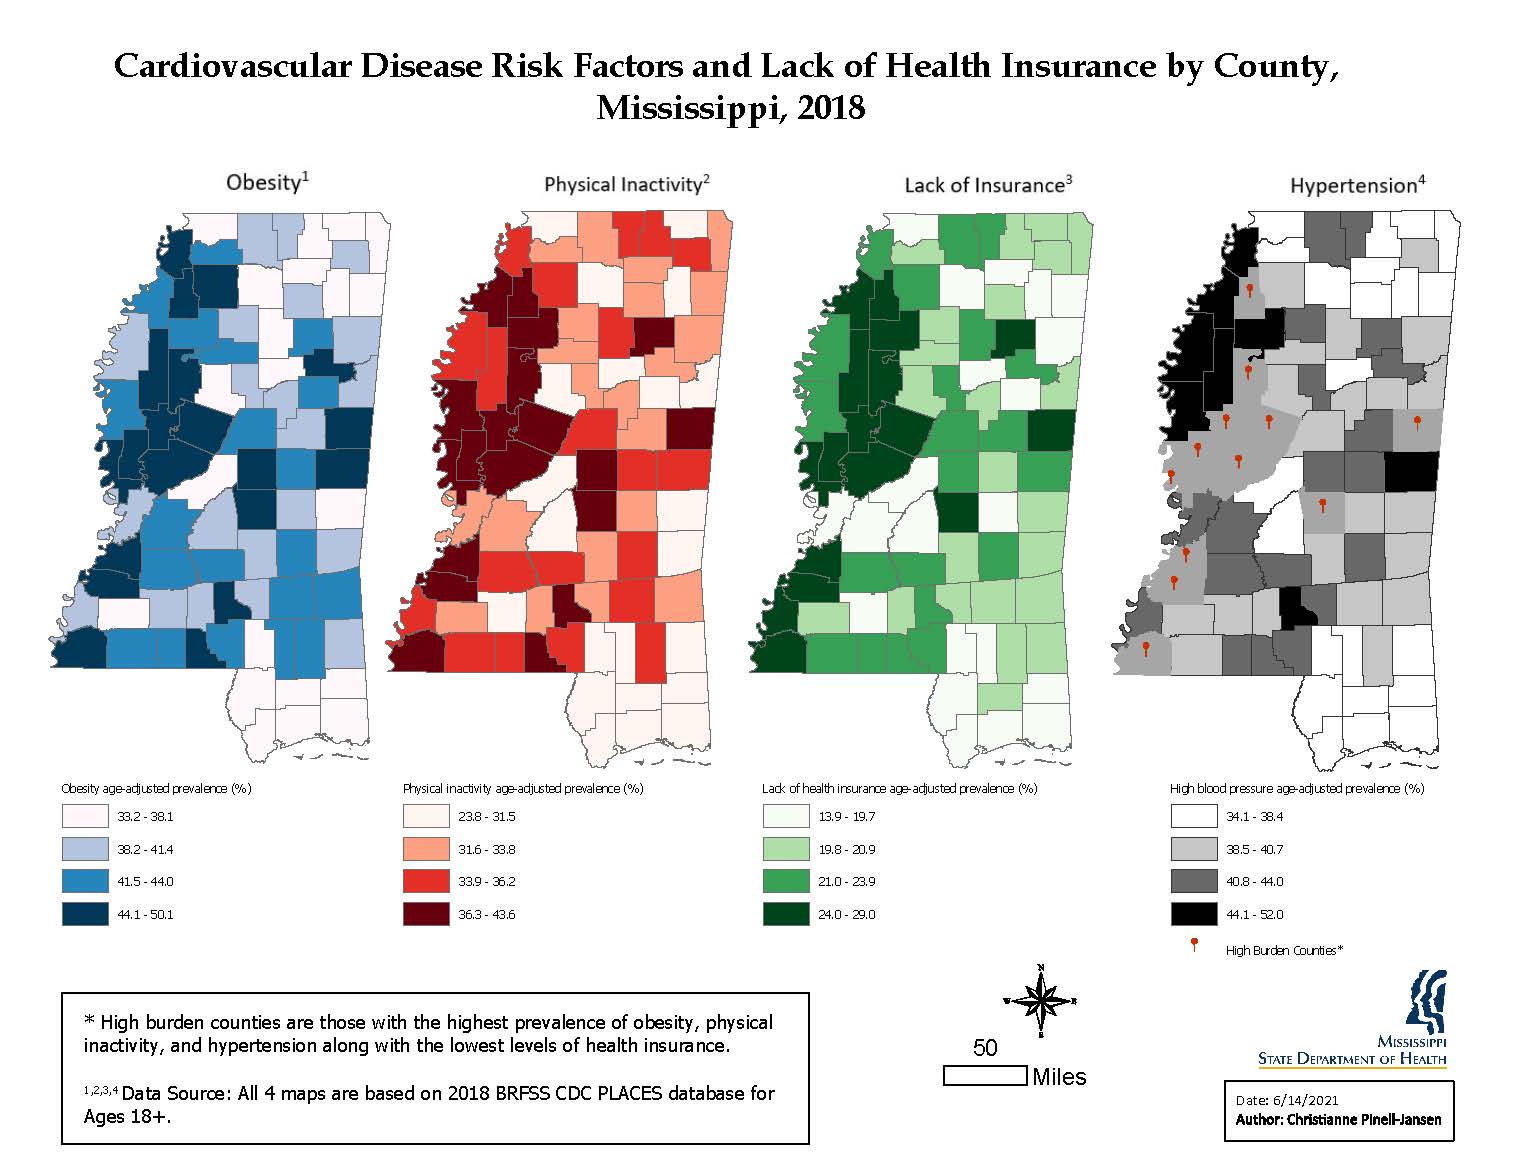 Cardiovascular Disease Risk Factors and Lack of Health Insurance by County, Mississippi, 2018